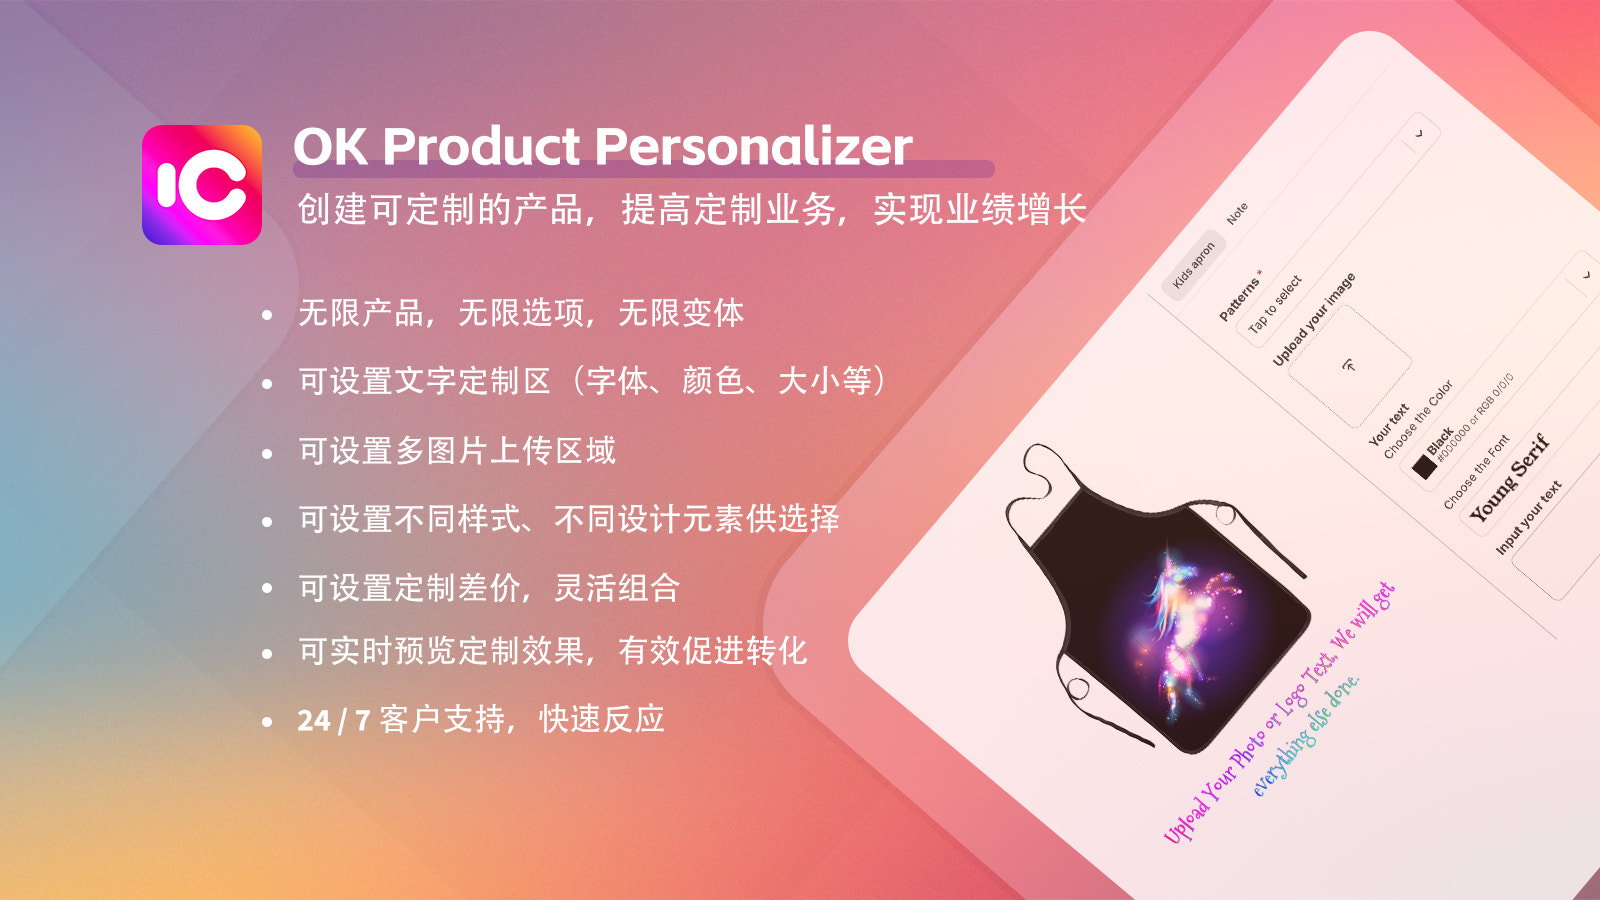 OK Product Personalizer Features